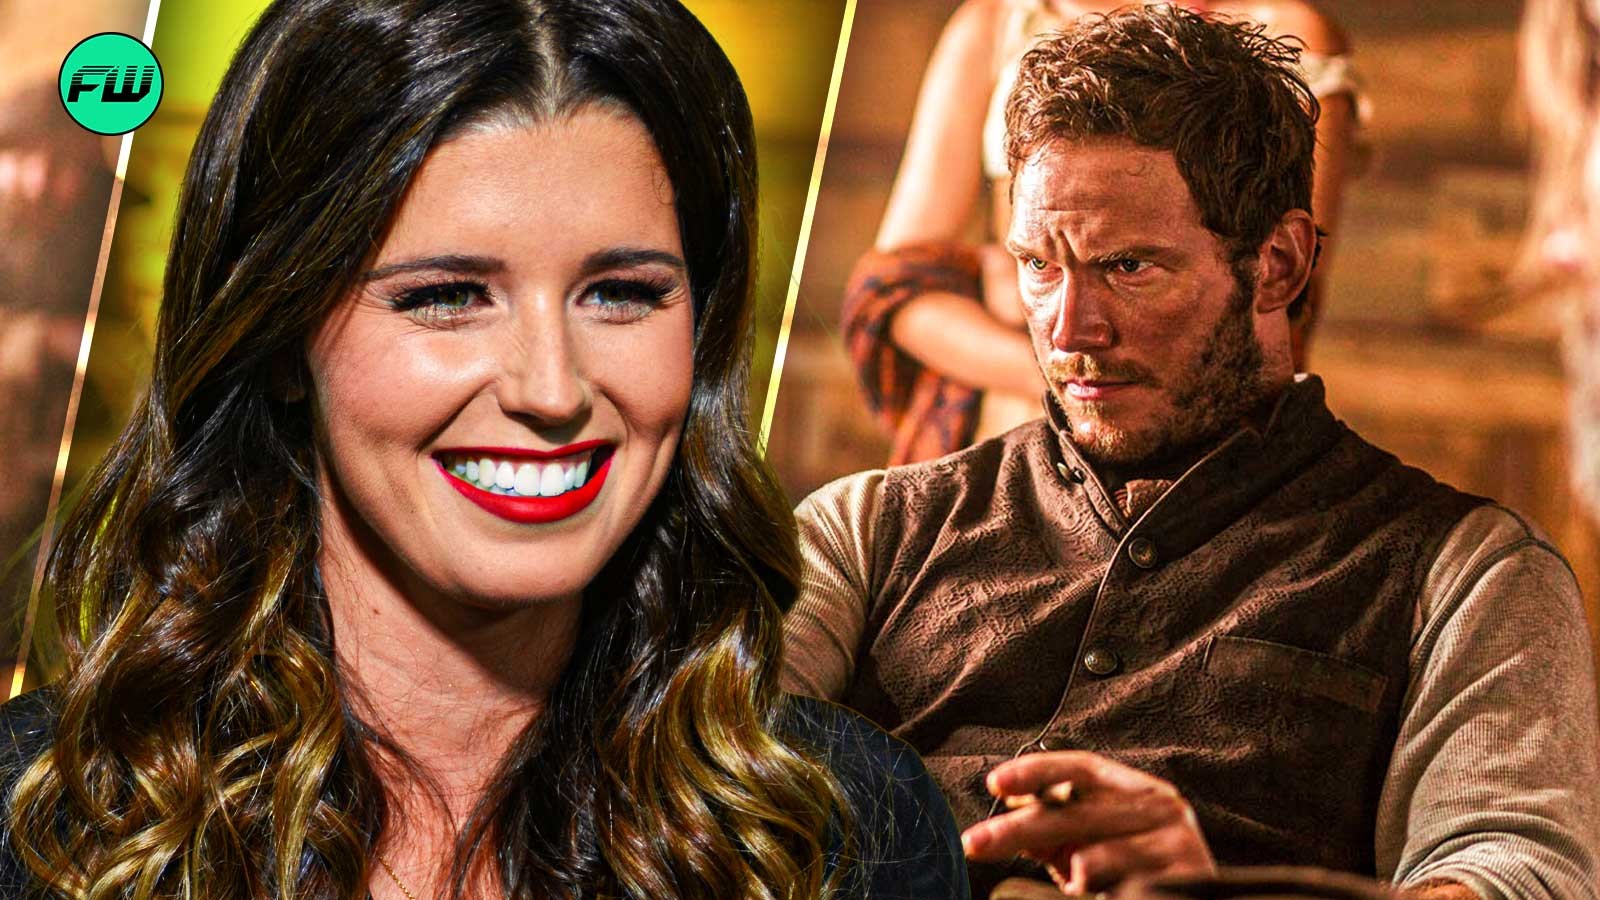 Chris Pratt was not wrong about the “shitty” backlash to his post about his wife Katherine Schwarzenegger